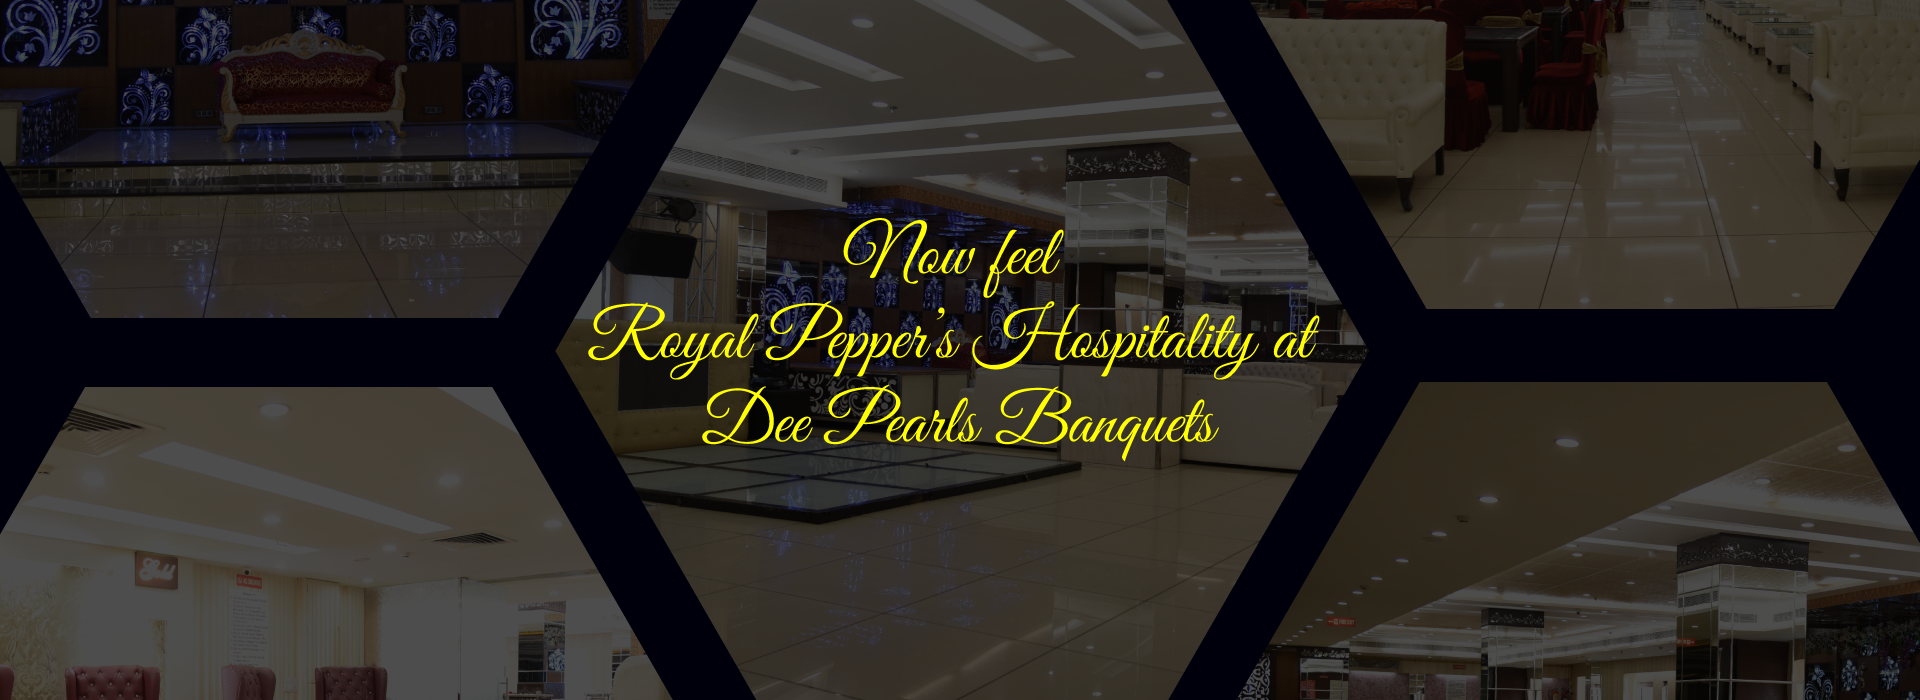 banquets in rohini, Banquet Hall in rohini, By Royal Pepper Banquets